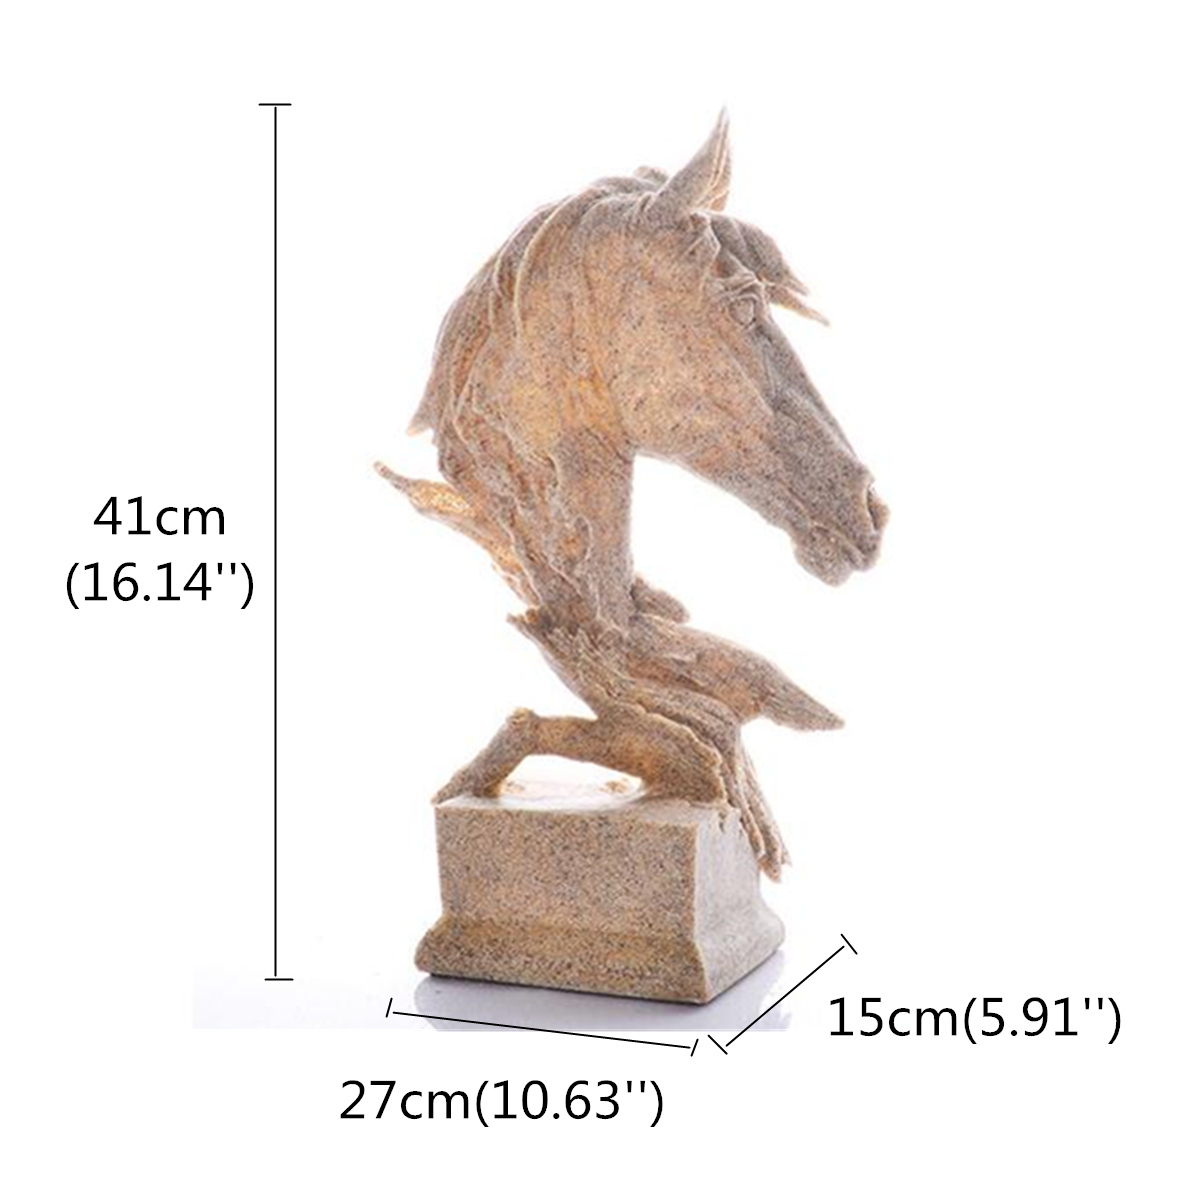 Vintage-Statue-Horse-Head-Bust-Ornament-Sculpture-Figurine-Home-Feature-Display-Decorations-1639659-3